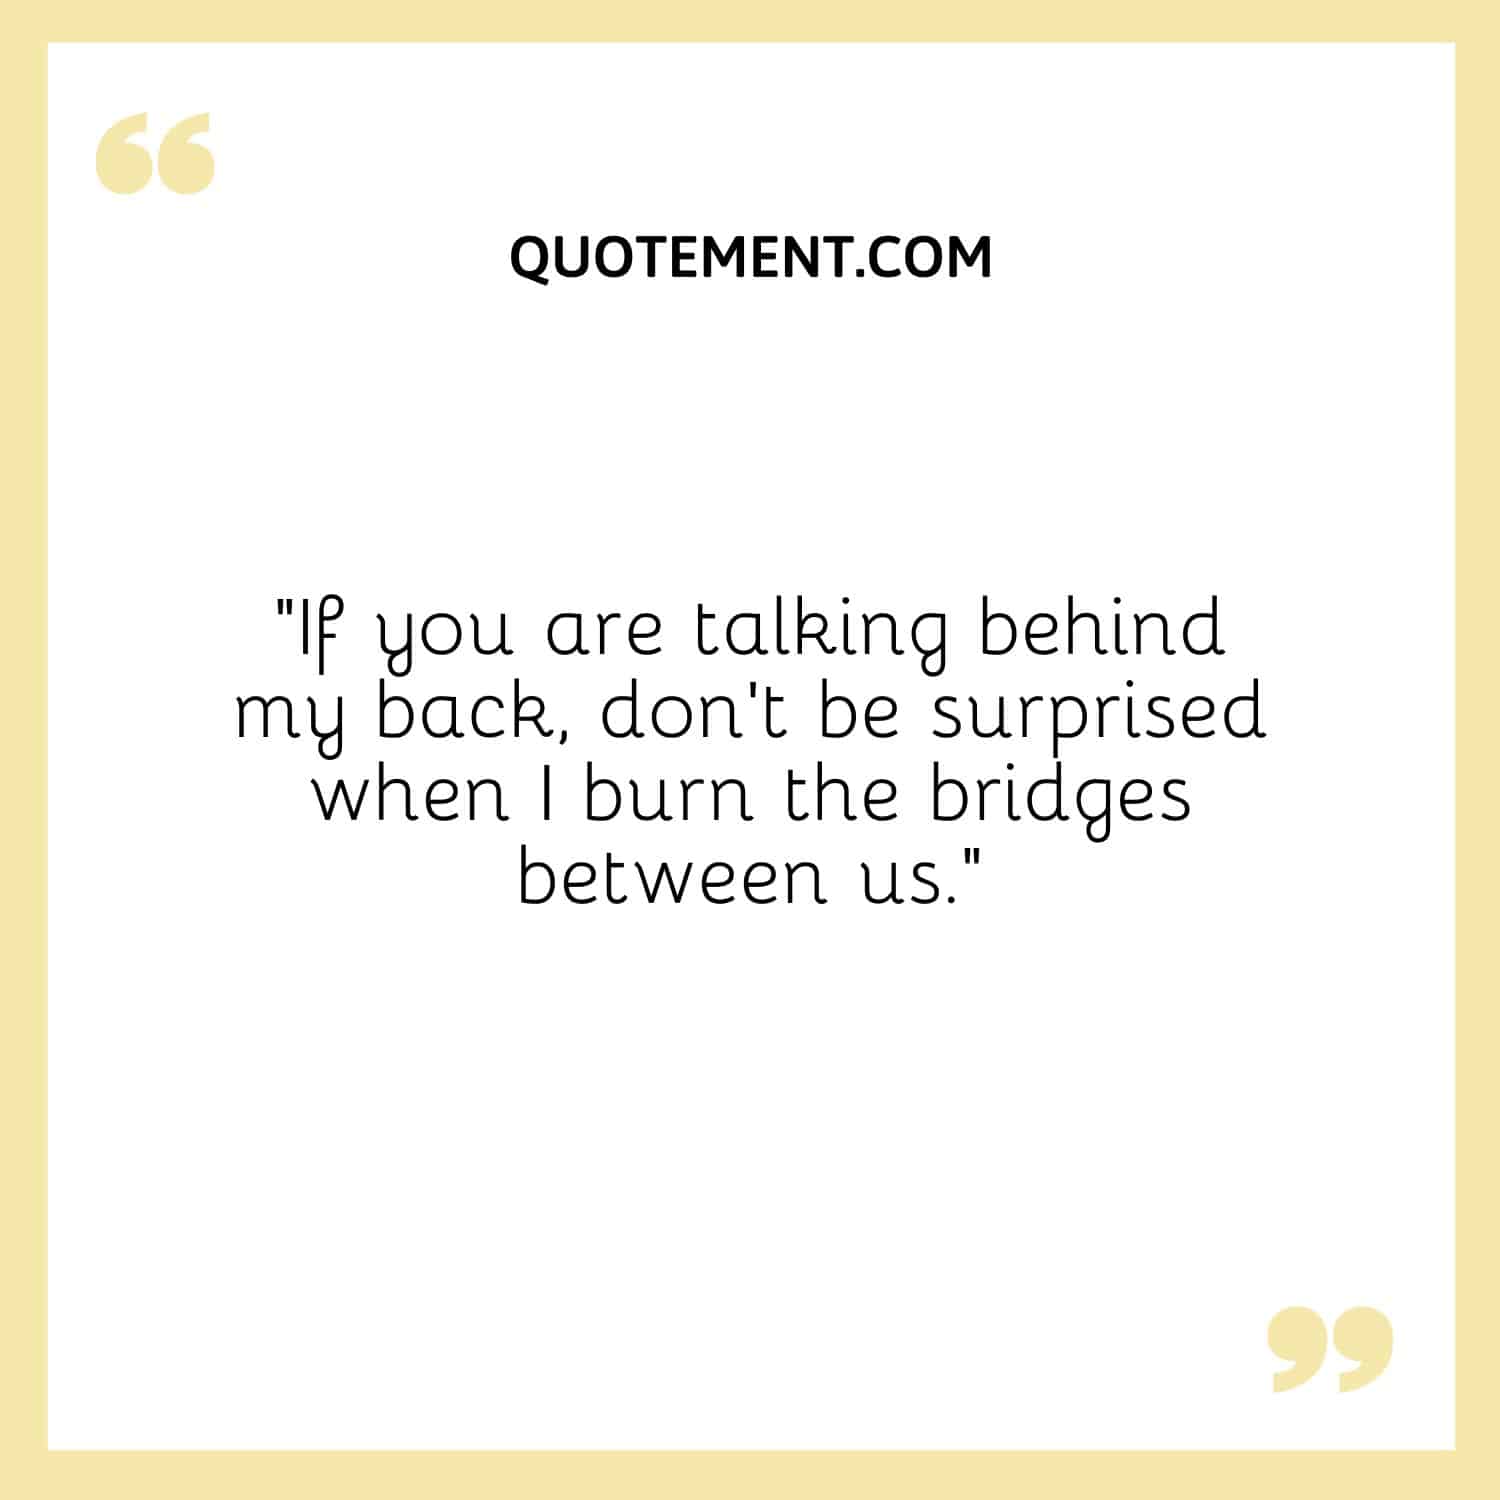 “If you are talking behind my back, don’t be surprised when I burn the bridges between us.”